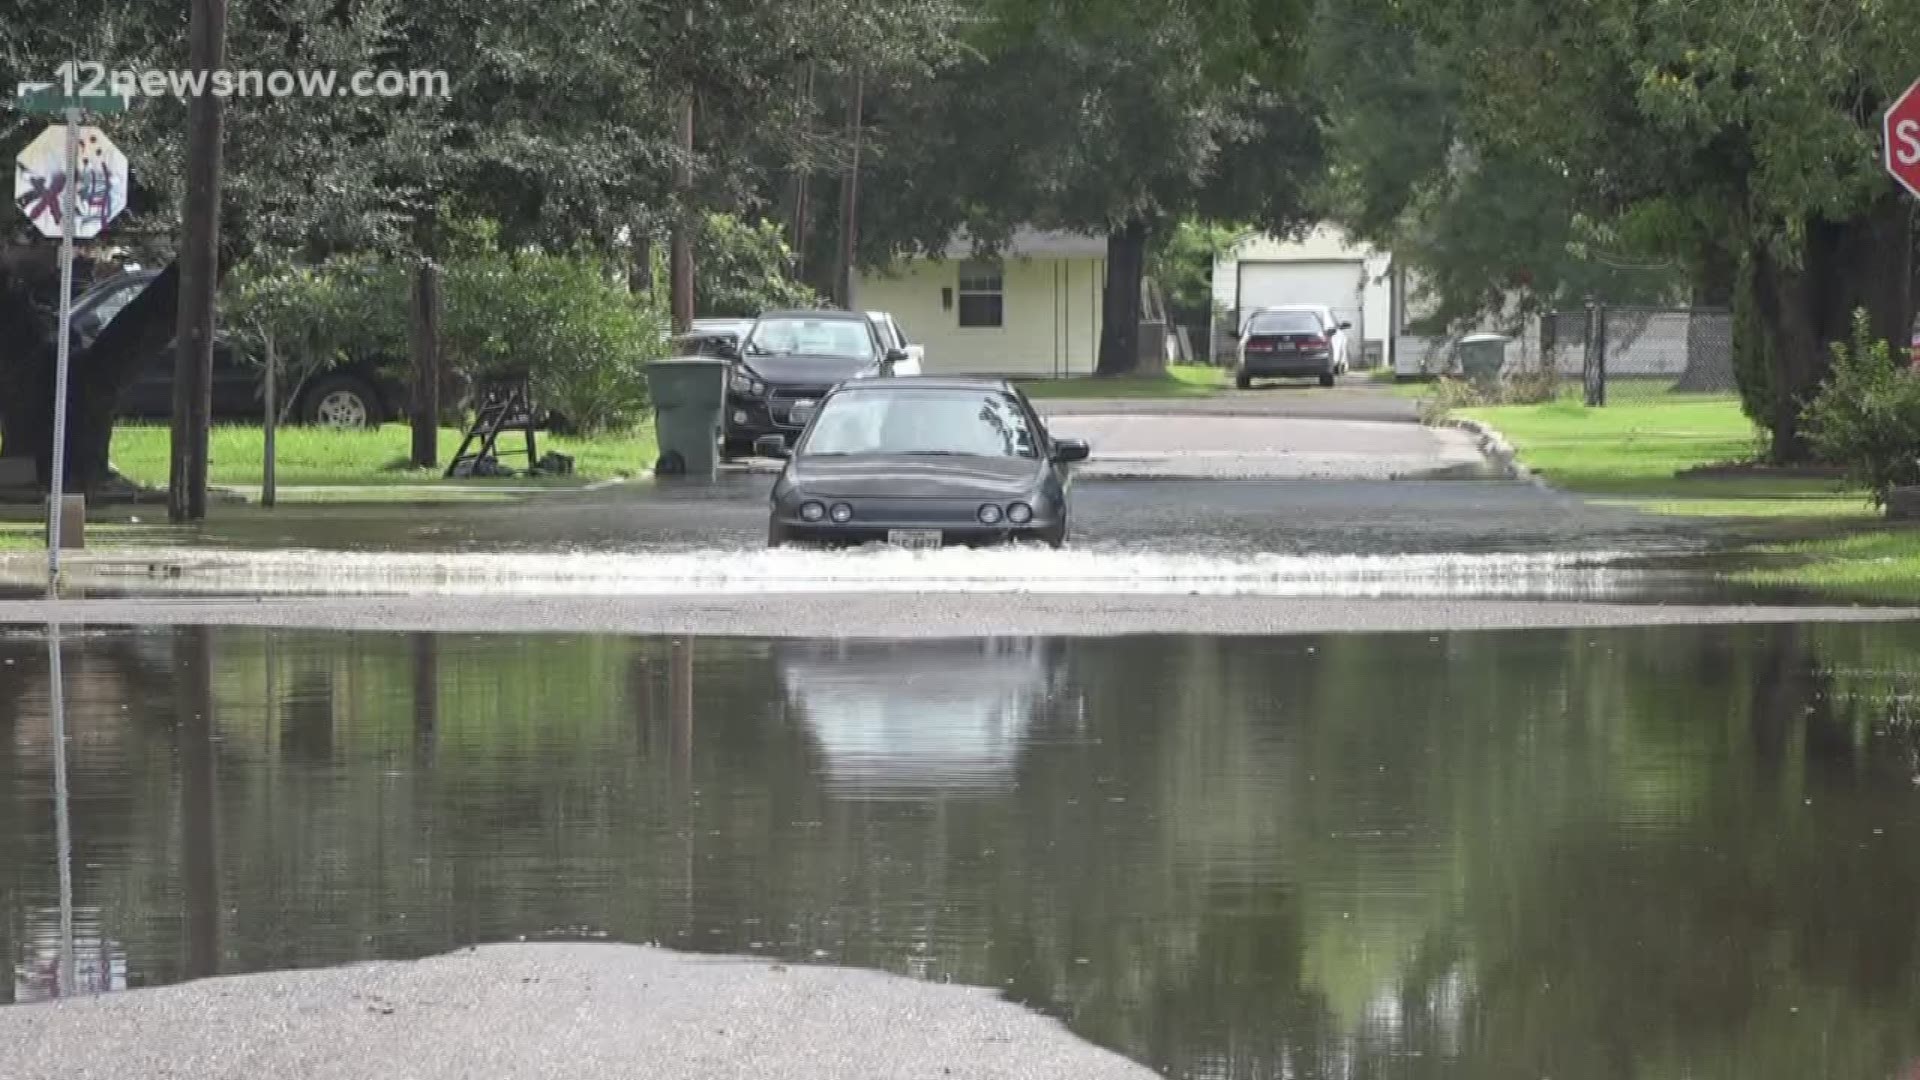 Residents in the Lakeview area of Port Arthur concerned about street flooding